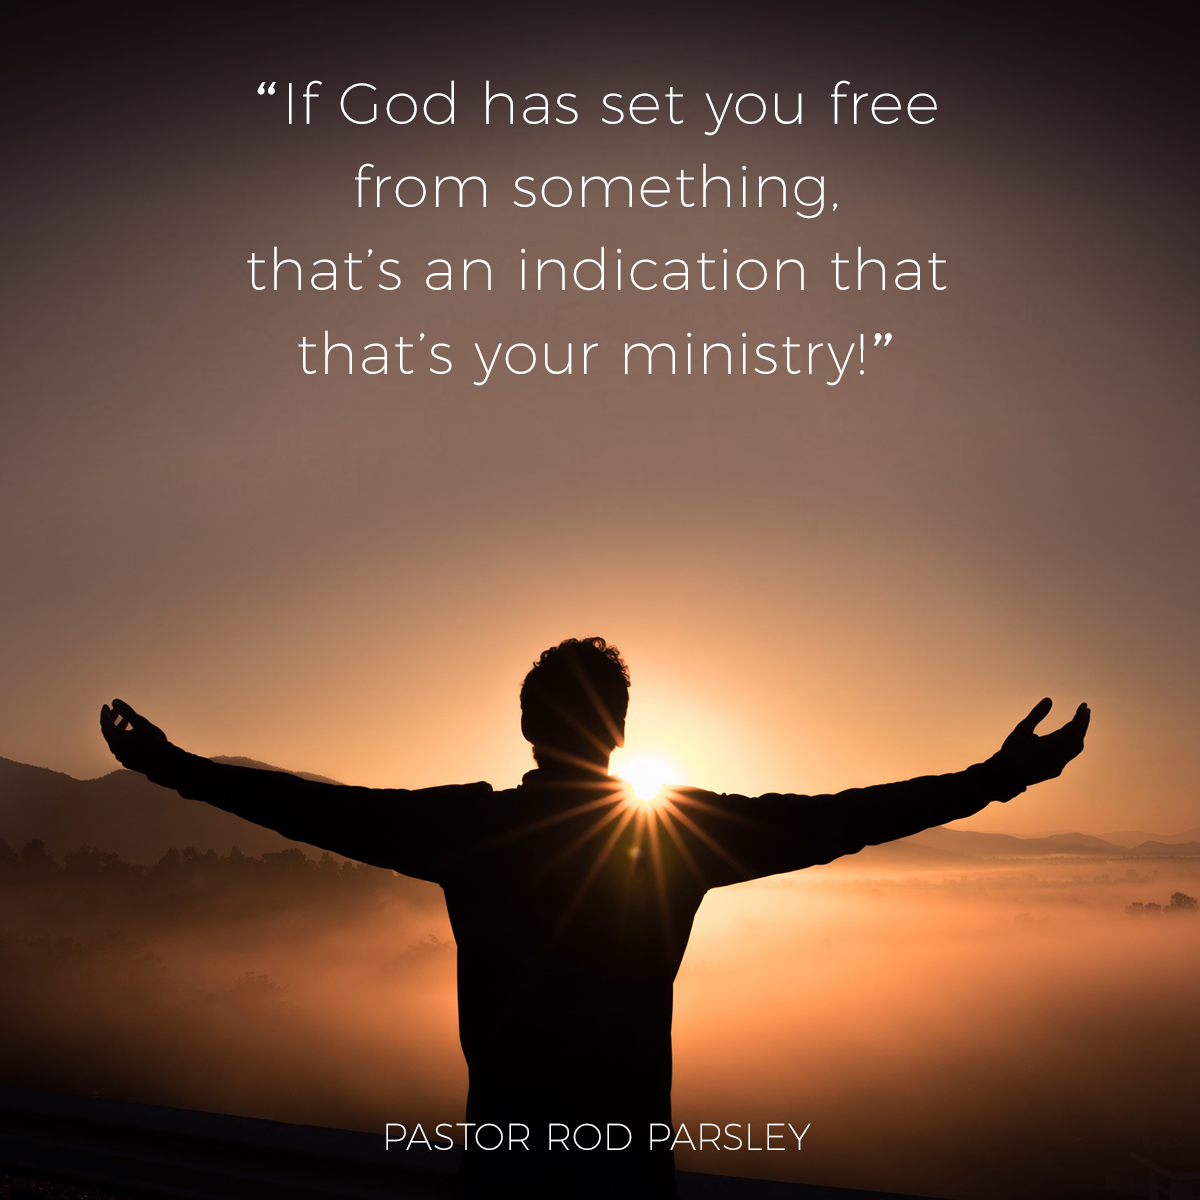 “If God has set you free from something, that’s an indication that that’s your ministry!” – Pastor Rod Parsley